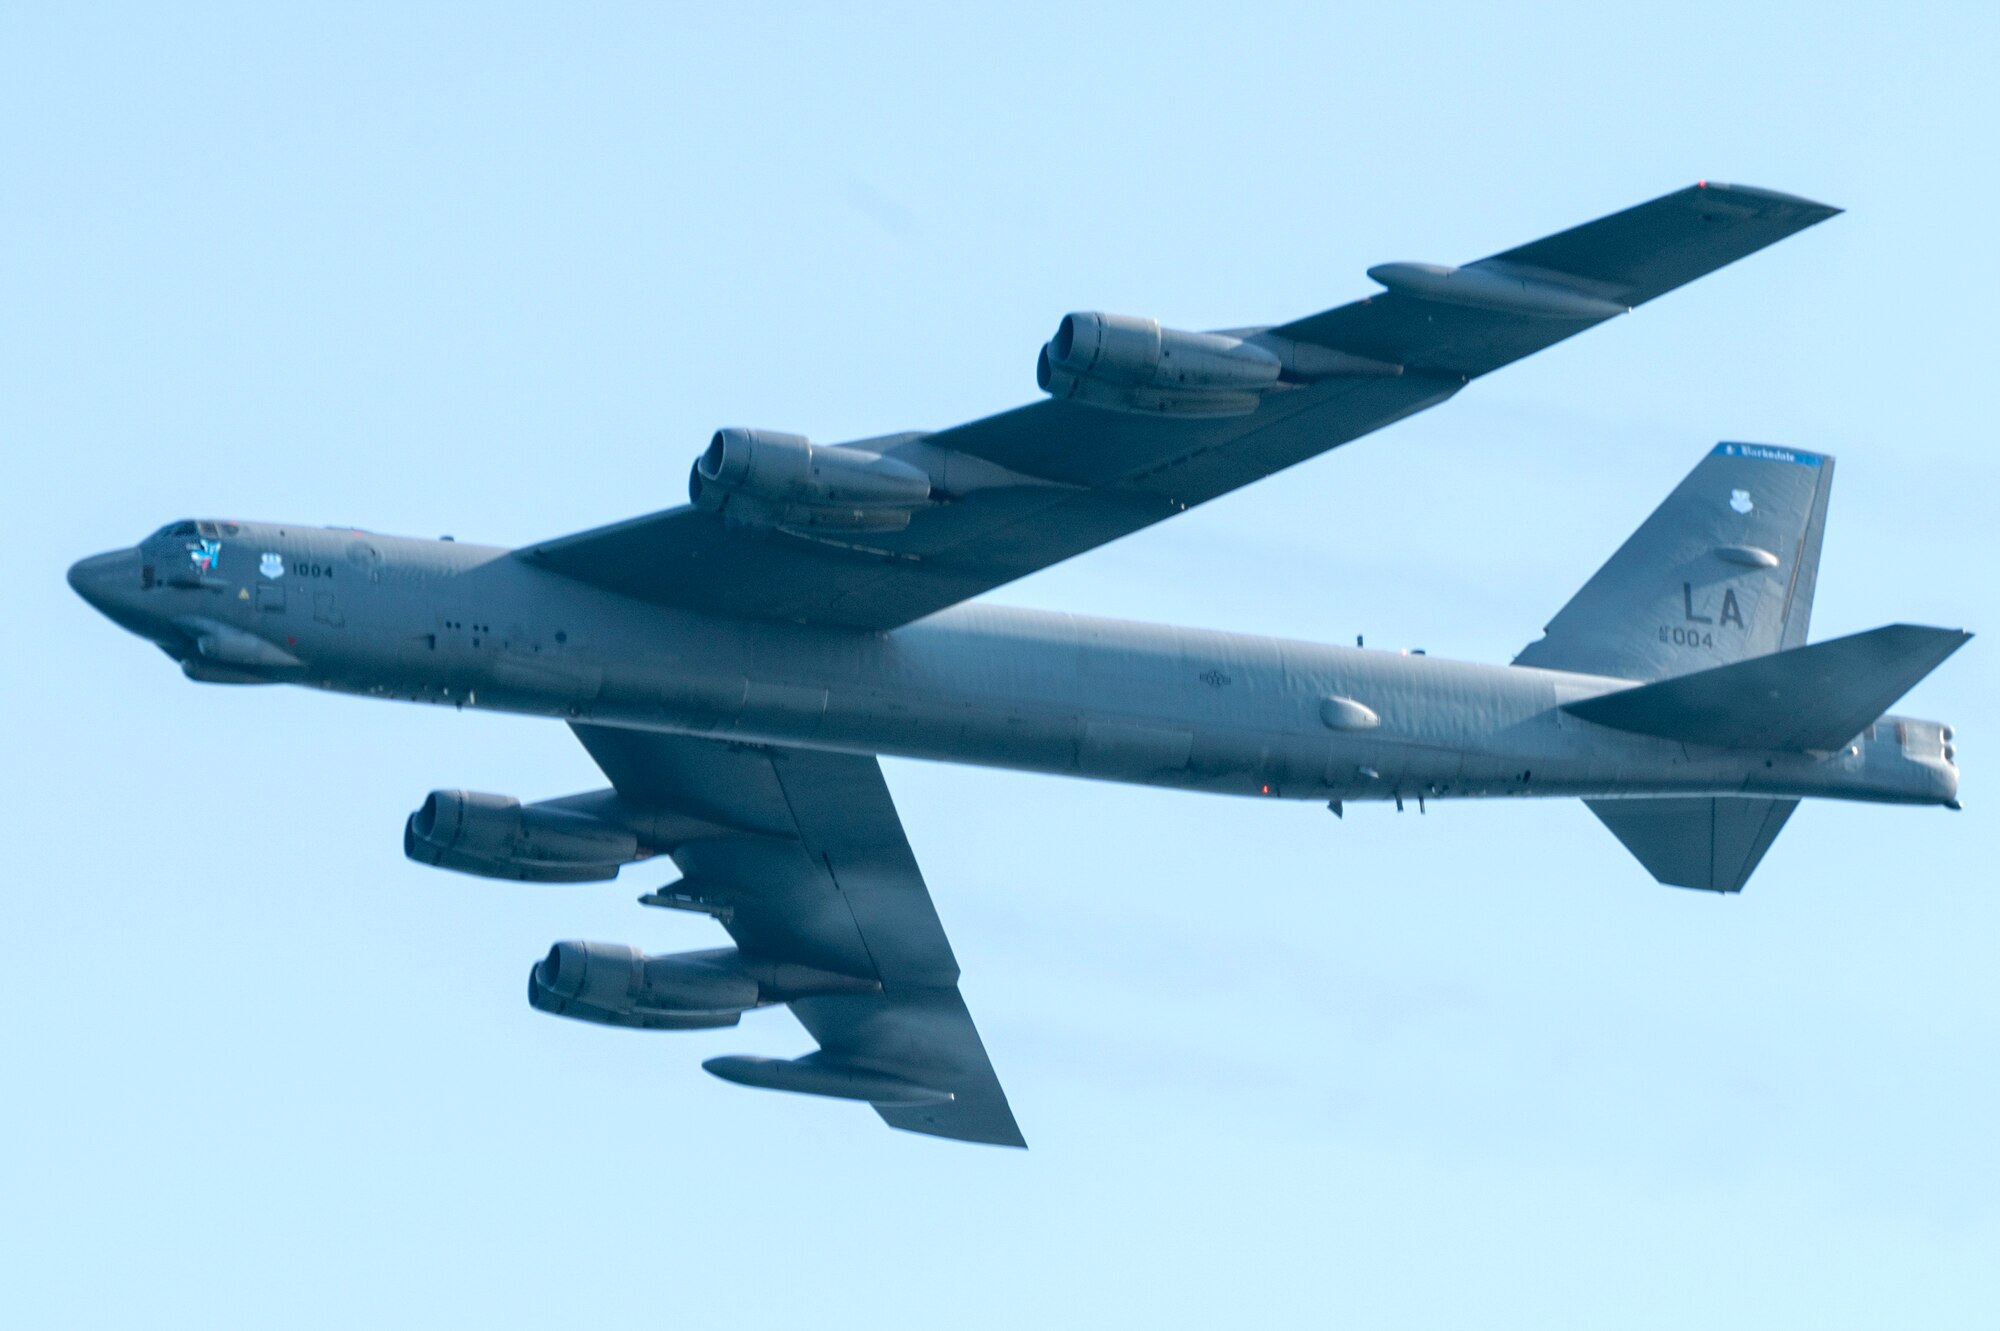 A B-52 Stratofortress assigned to the 2nd Bomb Wing, Barksdale AFB, LA, flies over during The Doolittle Raiders’ 80th Anniversary ceremony, April 18, 2022 at Okaloosa Island. On May 23, 2014, President Barack Obama signed Public Law 113-106 awarding the Congressional Gold Medal – the highest civilian recognition Congress can bestow – to the 80 members of the Doolittle Tokyo Raid in recognition of their service.